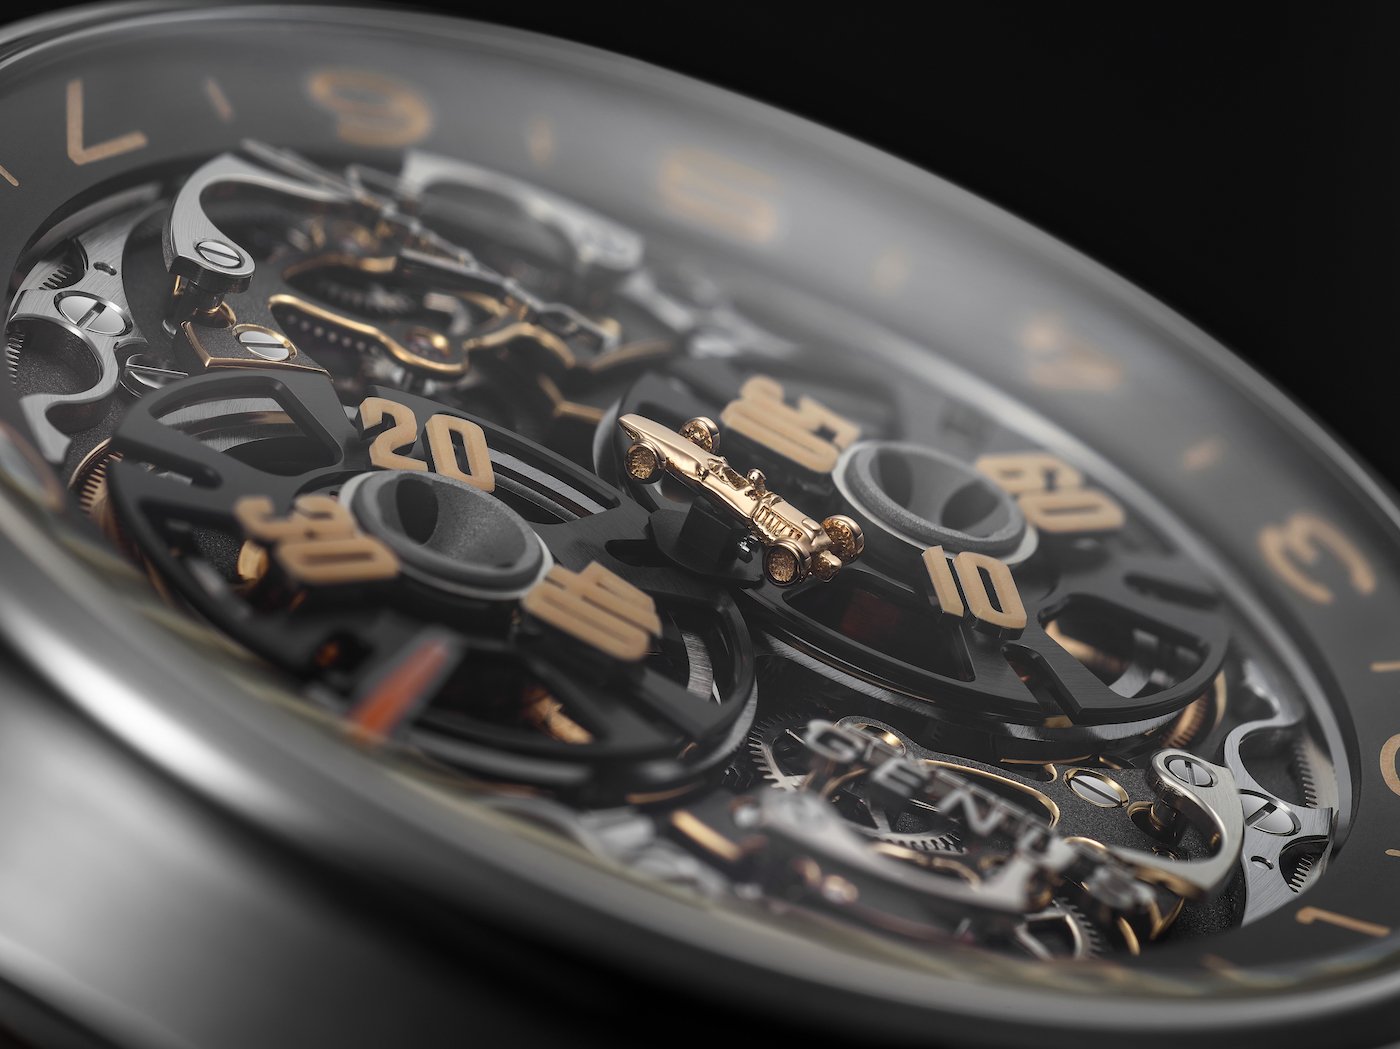 Singer Reimagined and Genus collaborate on the 8-Track for Only Watch